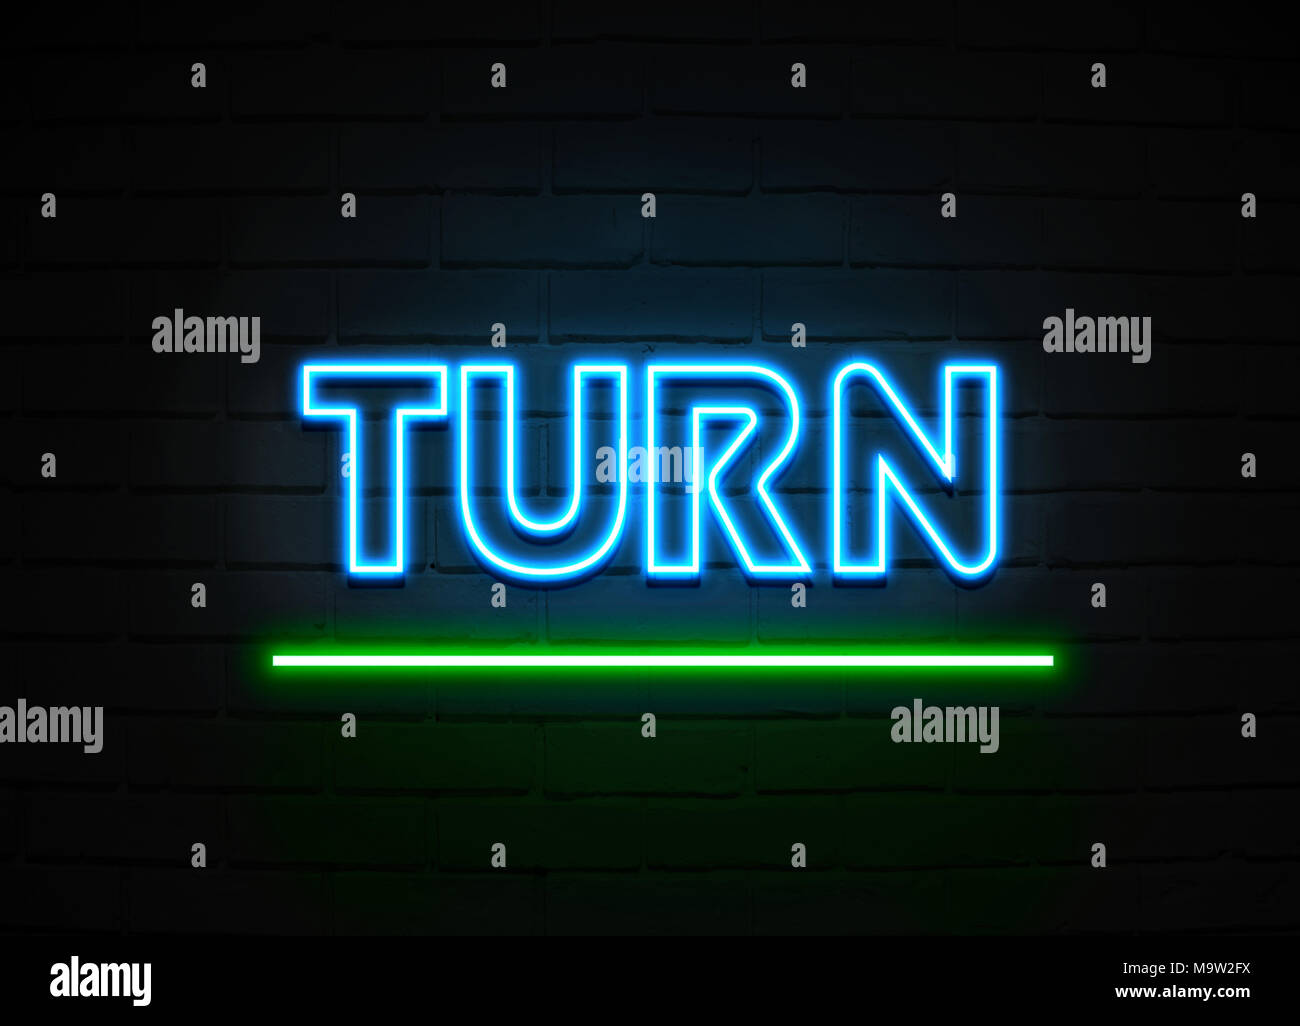 Turn neon sign - Glowing Neon Sign on brickwall wall - 3D rendered royalty free stock illustration. Stock Photo